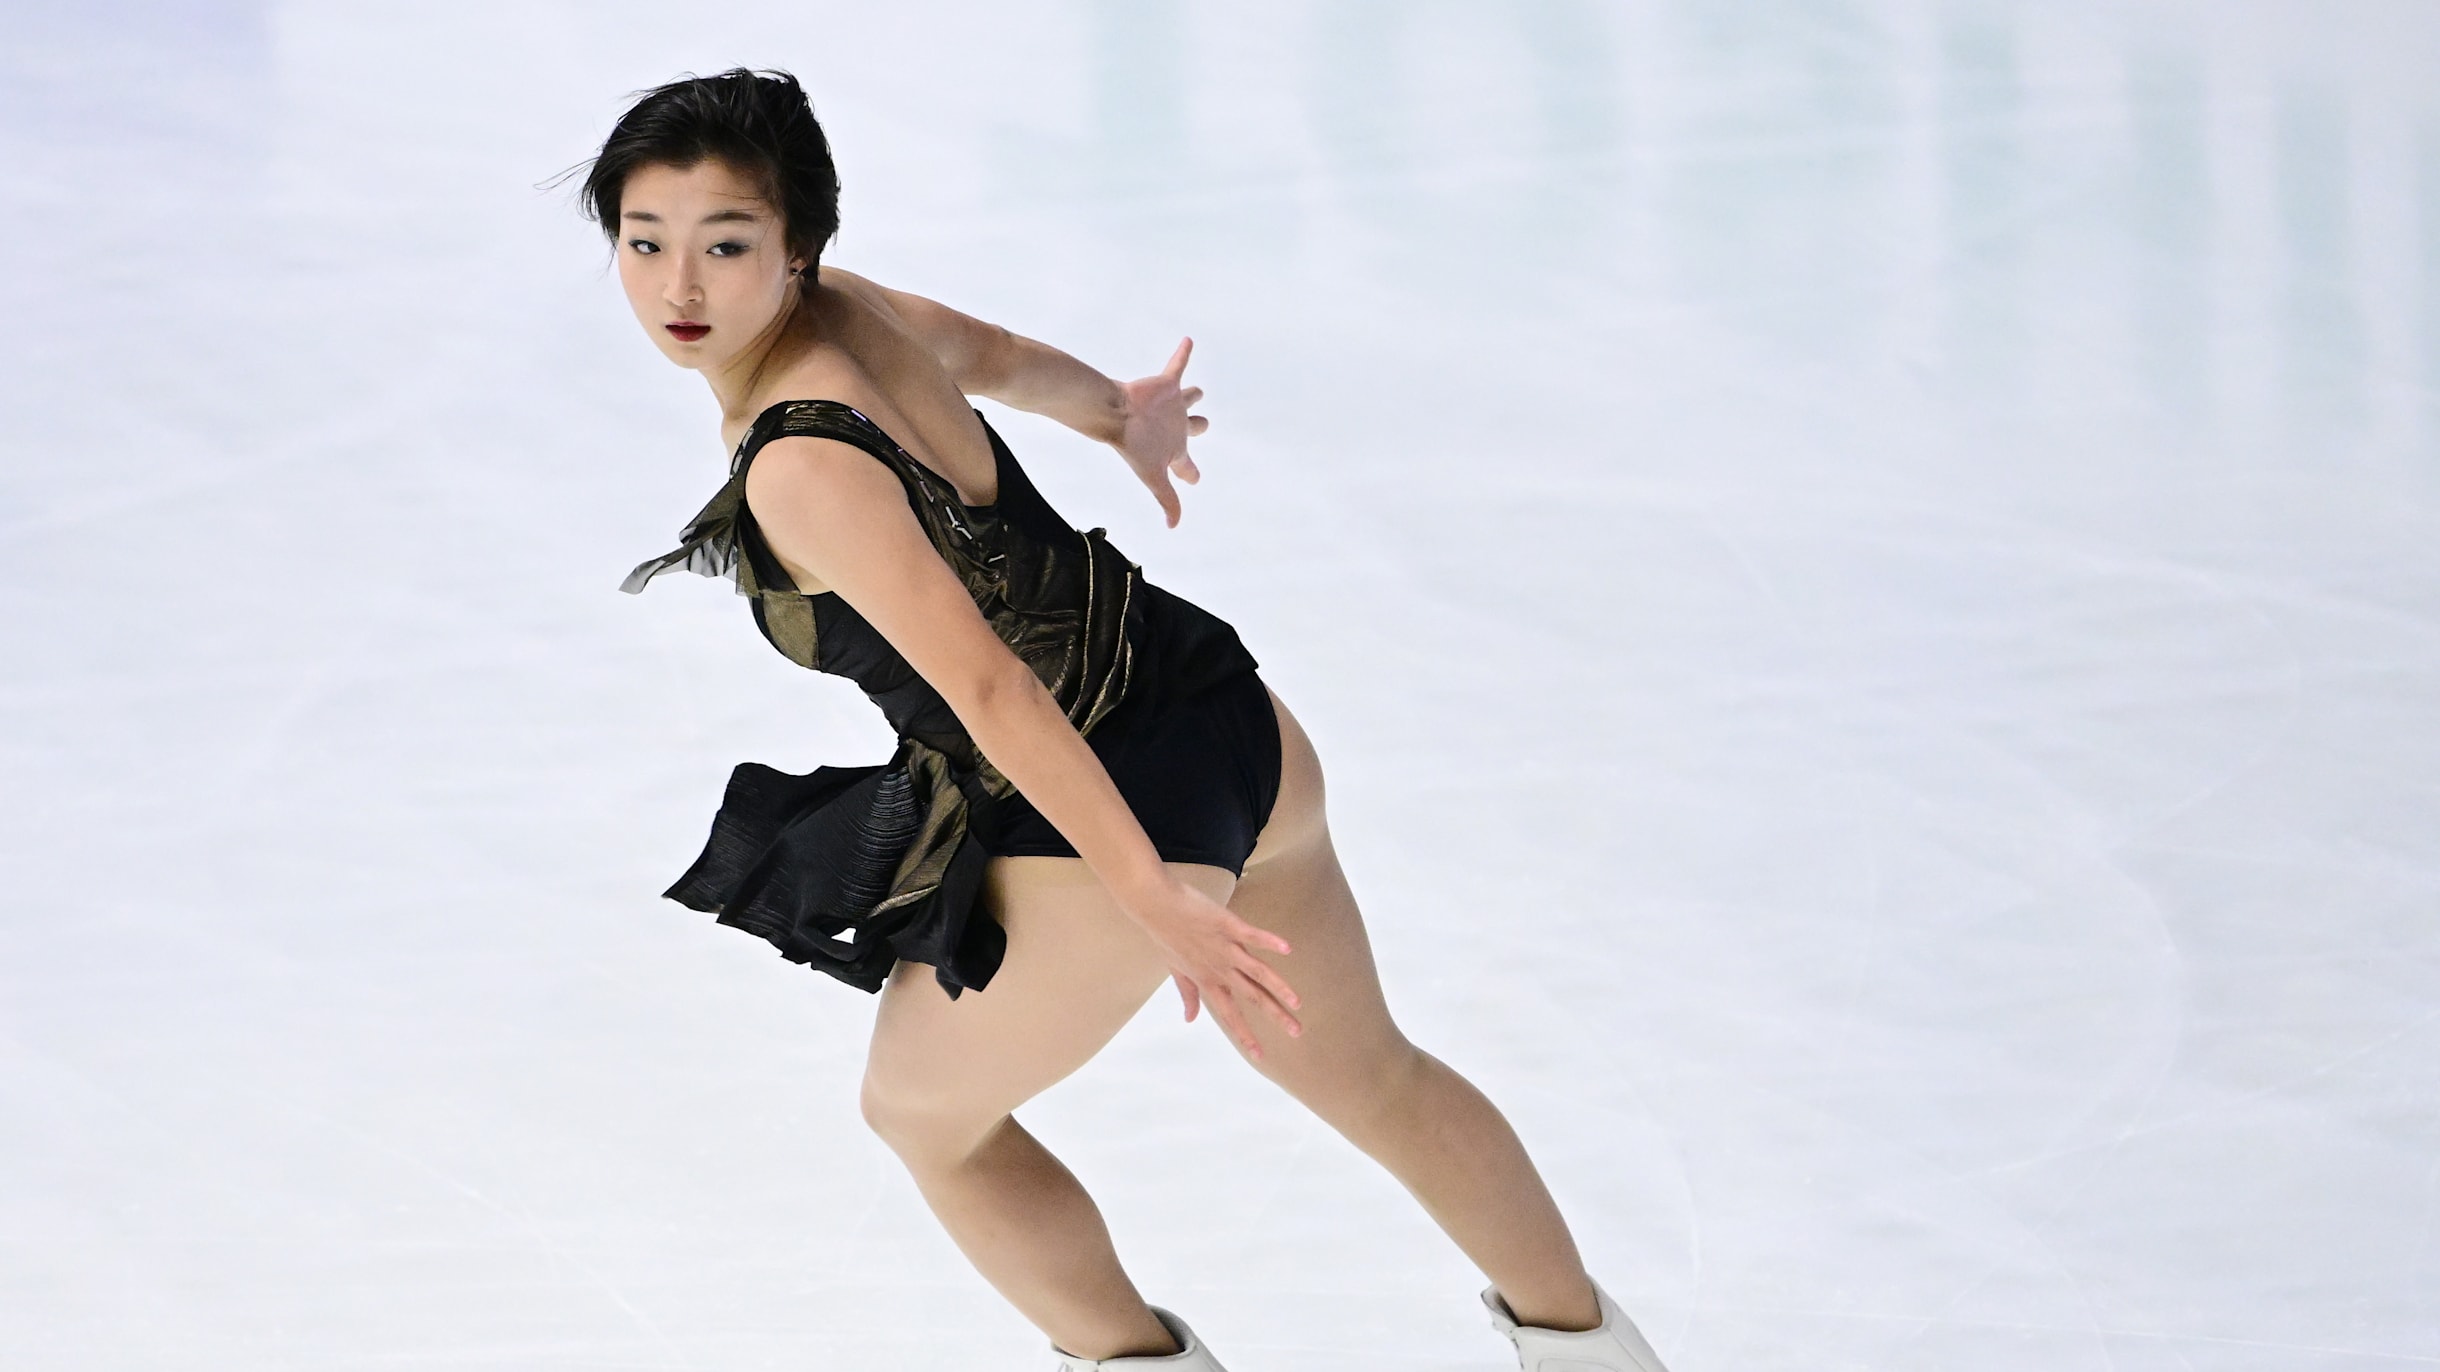 watch olympic figure skating online